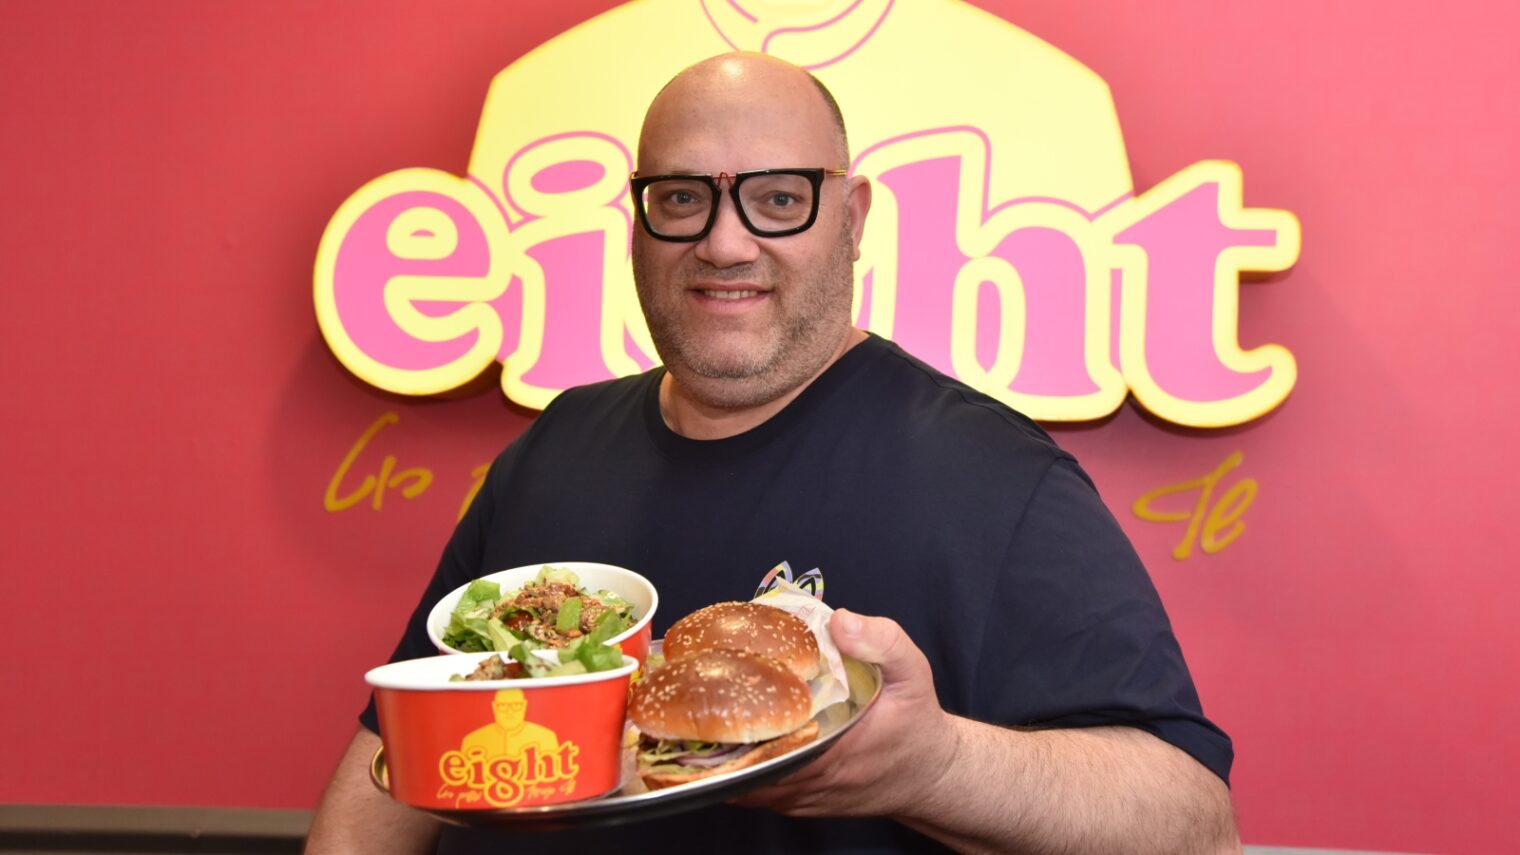 Chef Moshik Roth is building an empire of affordable sandwich shops in Israel. Photo: courtesy